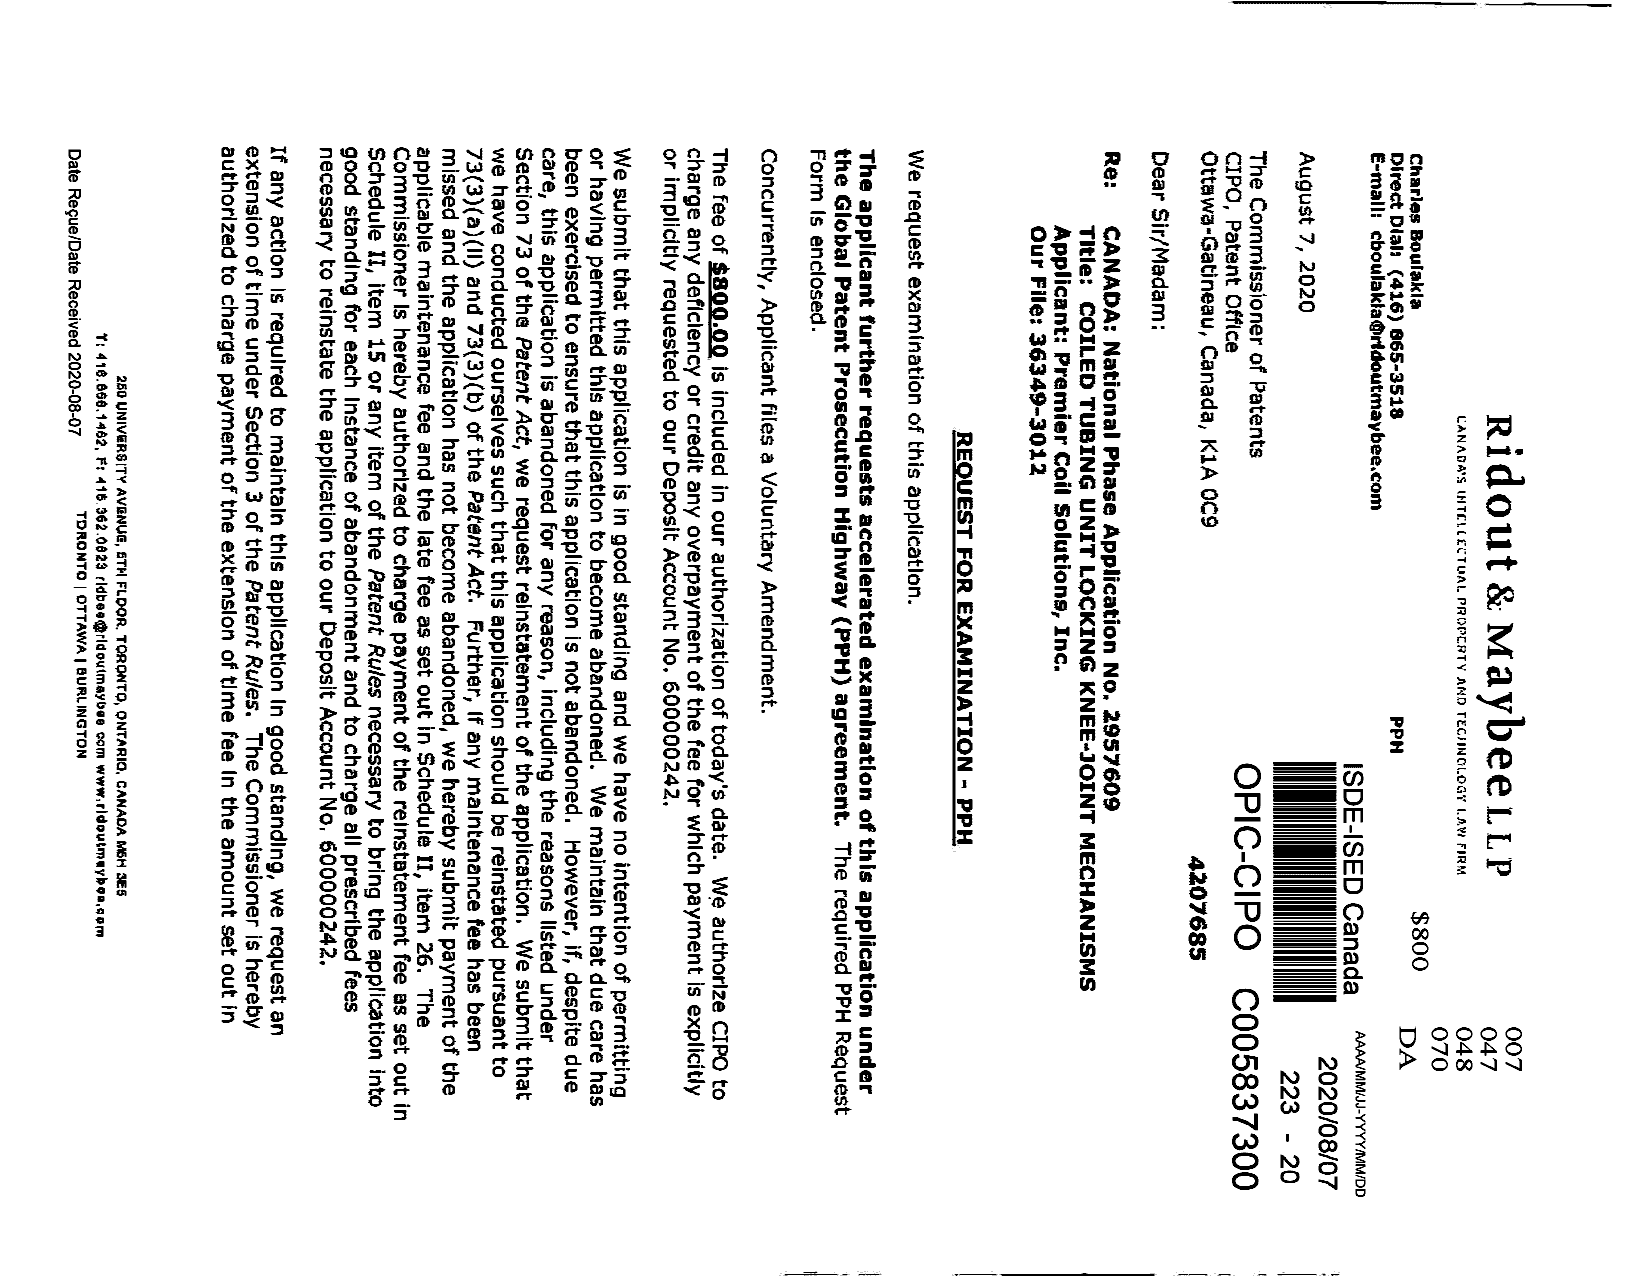 Canadian Patent Document 2957609. Request for Examination 20200807. Image 1 of 10